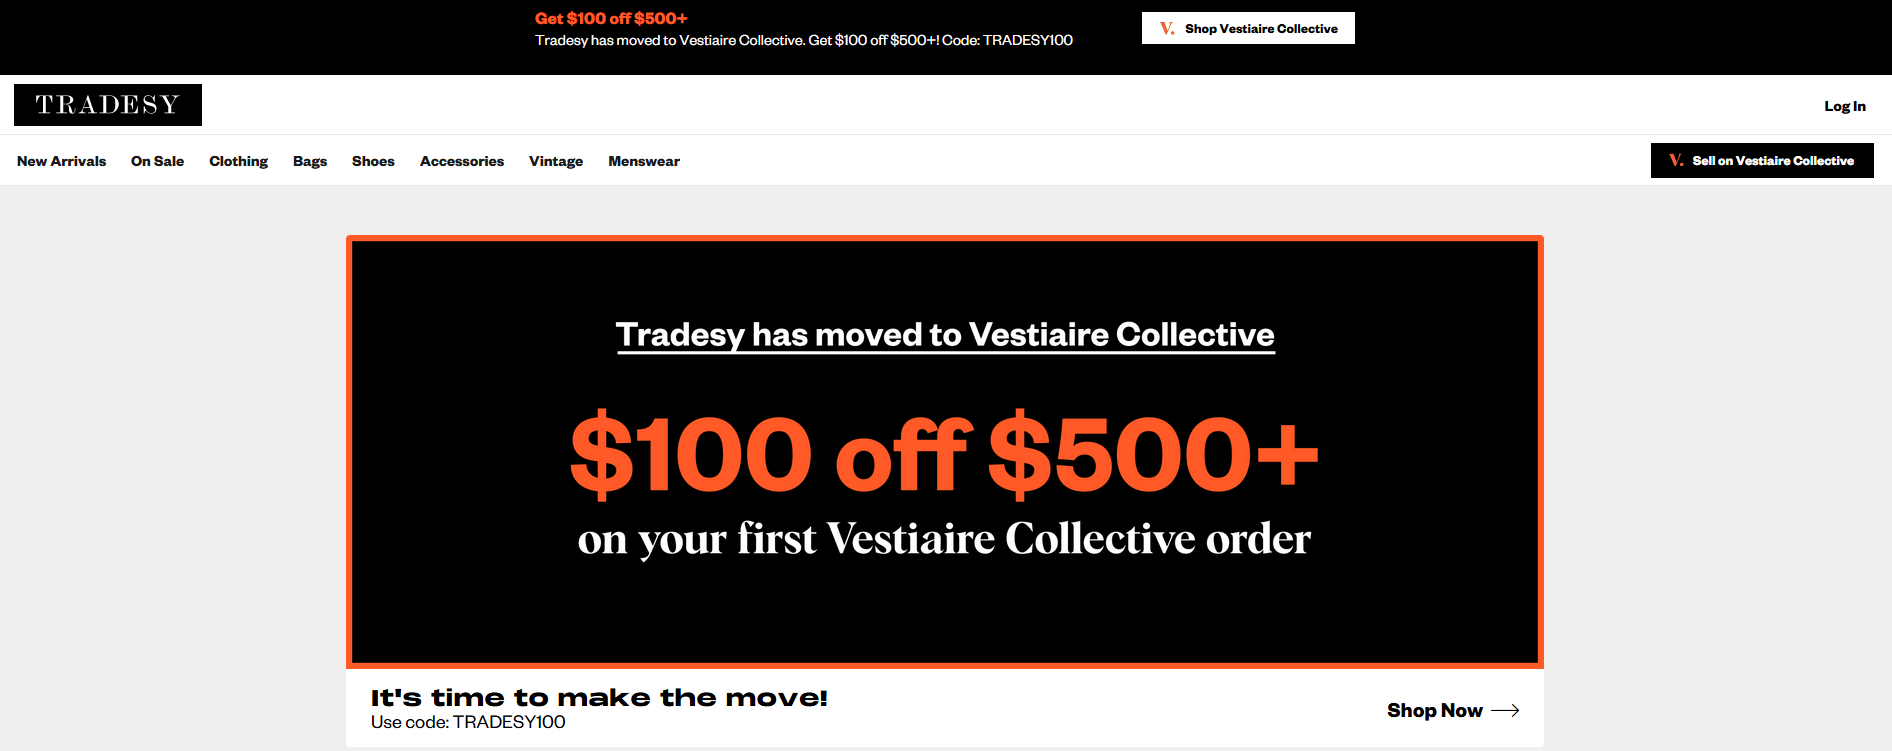 A homepage image of Tradesy website taken while searching for sites like poshmark